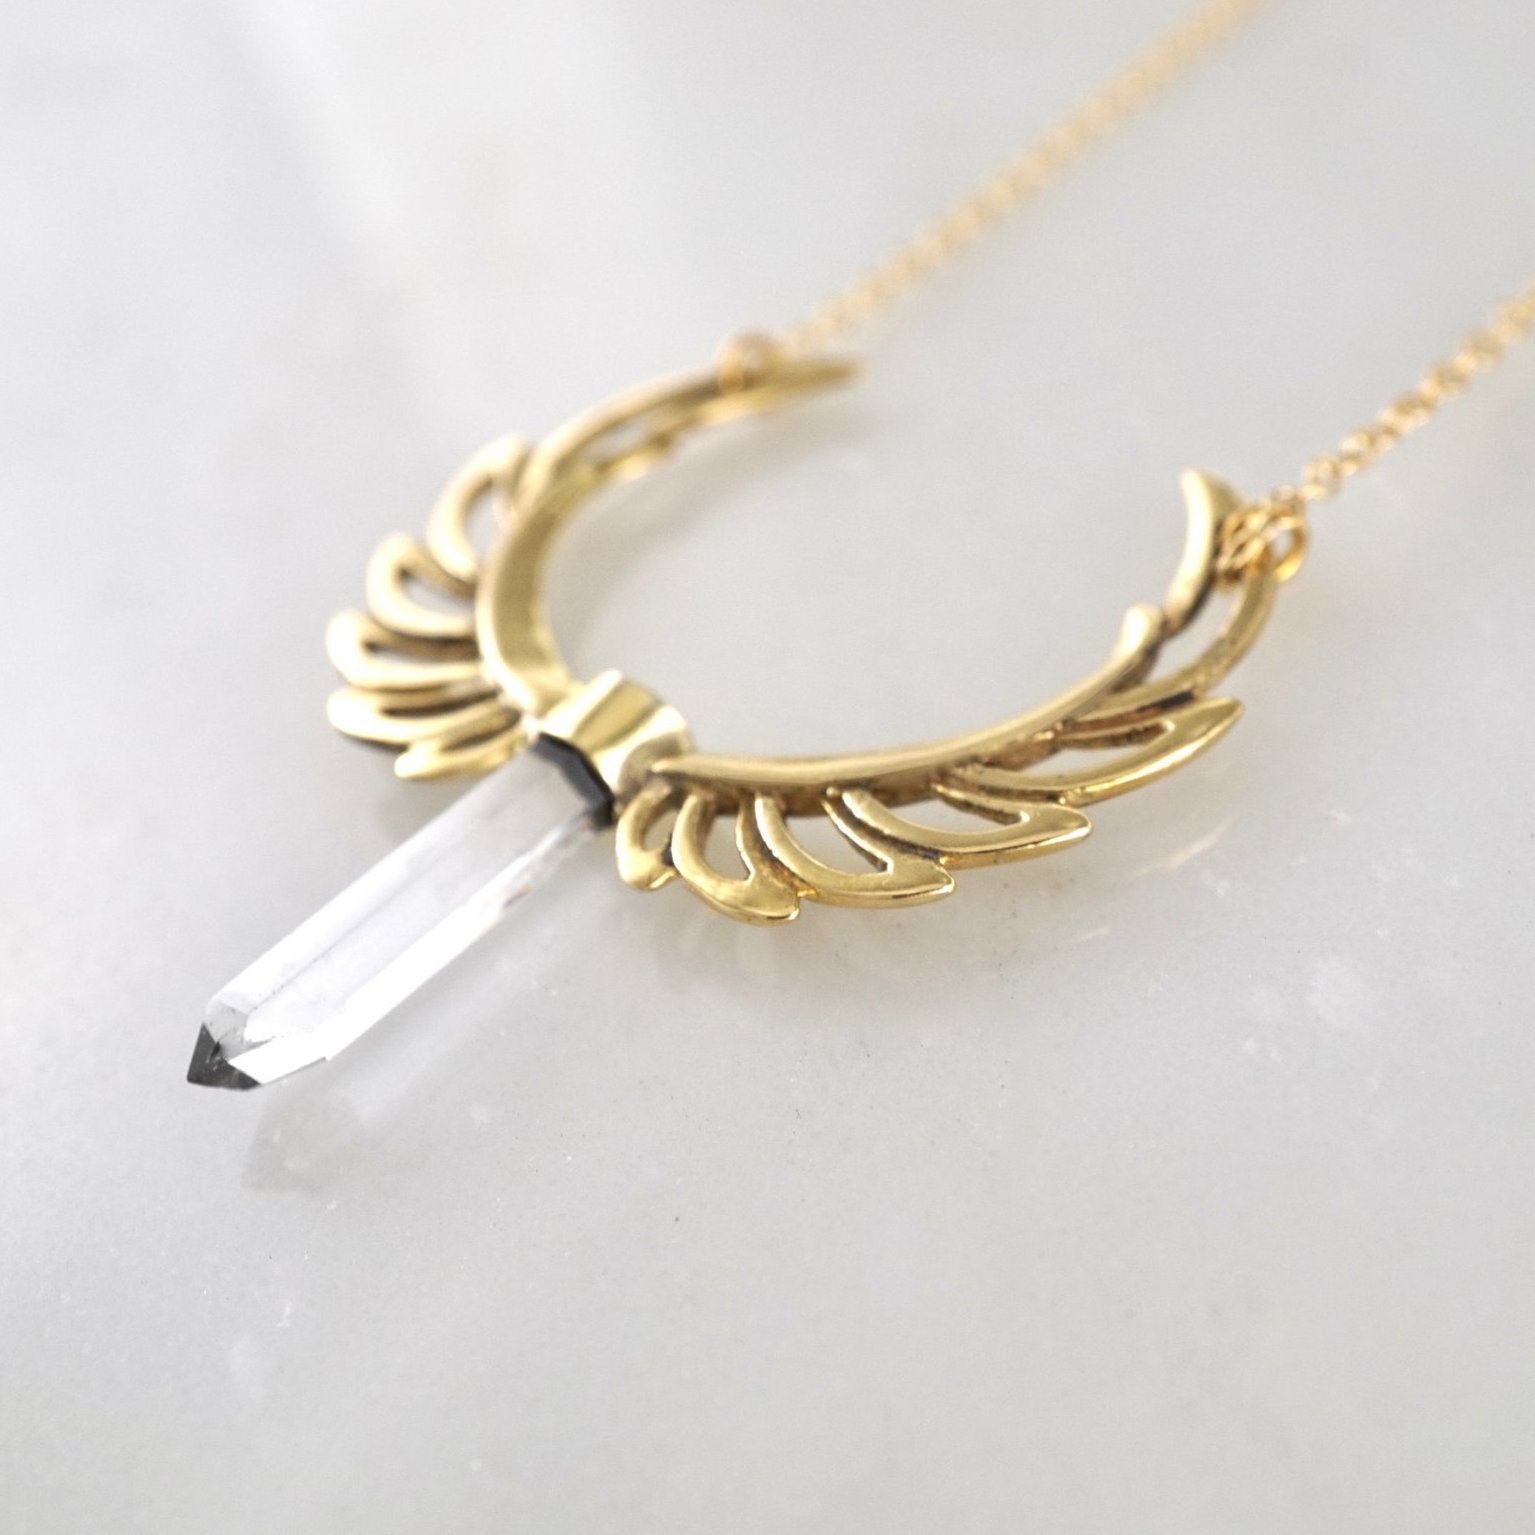 Crystal Phoenix Feather Necklace - Statement Necklace with quartz crystal point.